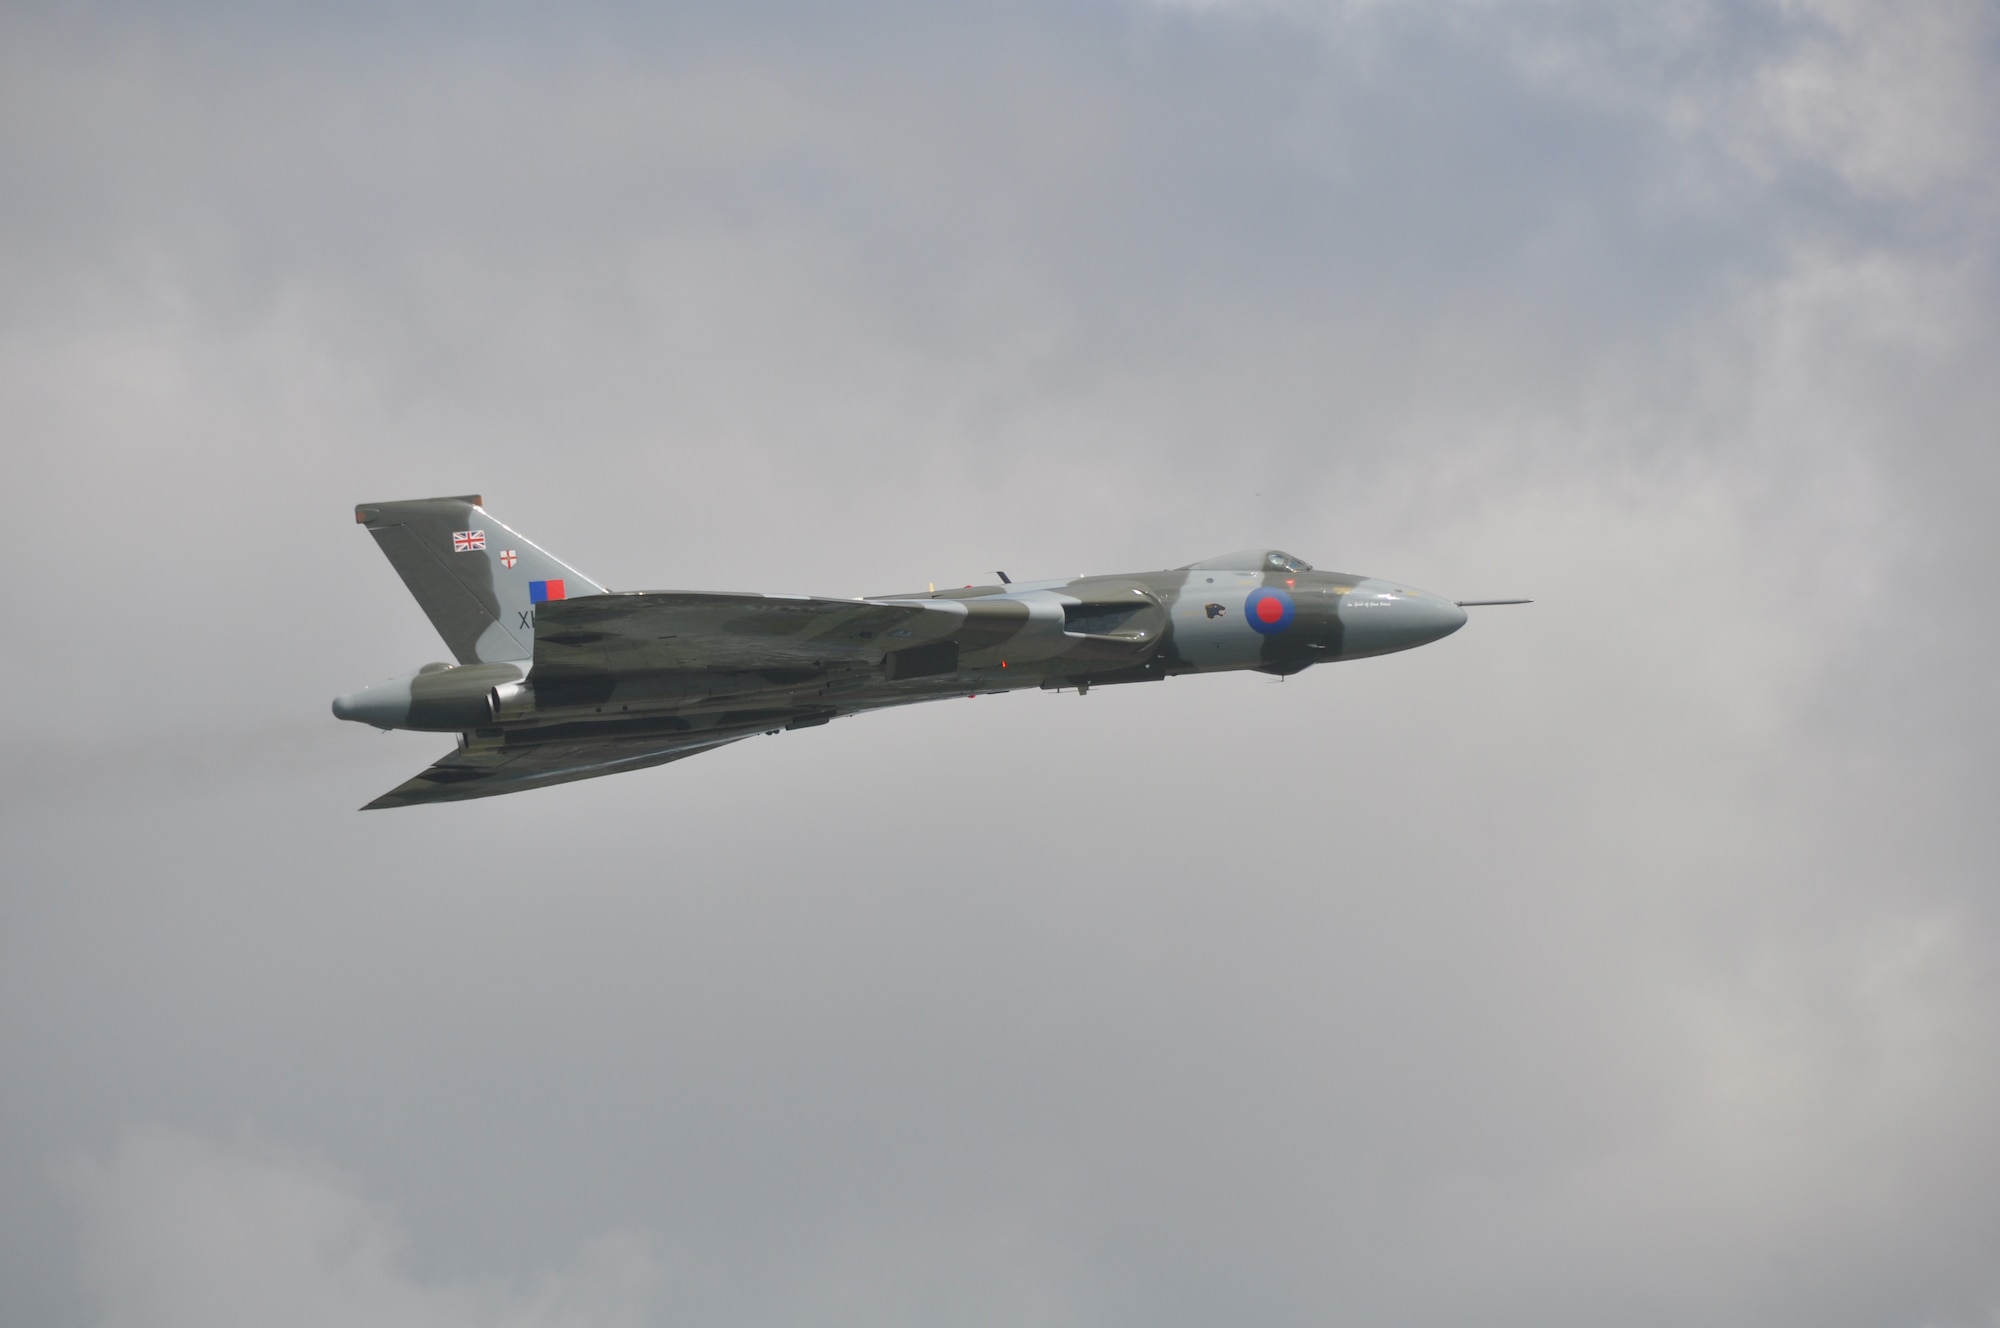 Thousands of spectators witness the Vulcan XH558, a veteran aircraft dating back to the Cold War, make one of its final flights during the annual Royal International Air Tattoo July 7-8 at RAF Fairford in the United Kingdom. (U.S. Air Force photo/Master Sgt. Donna T. Jeffries)